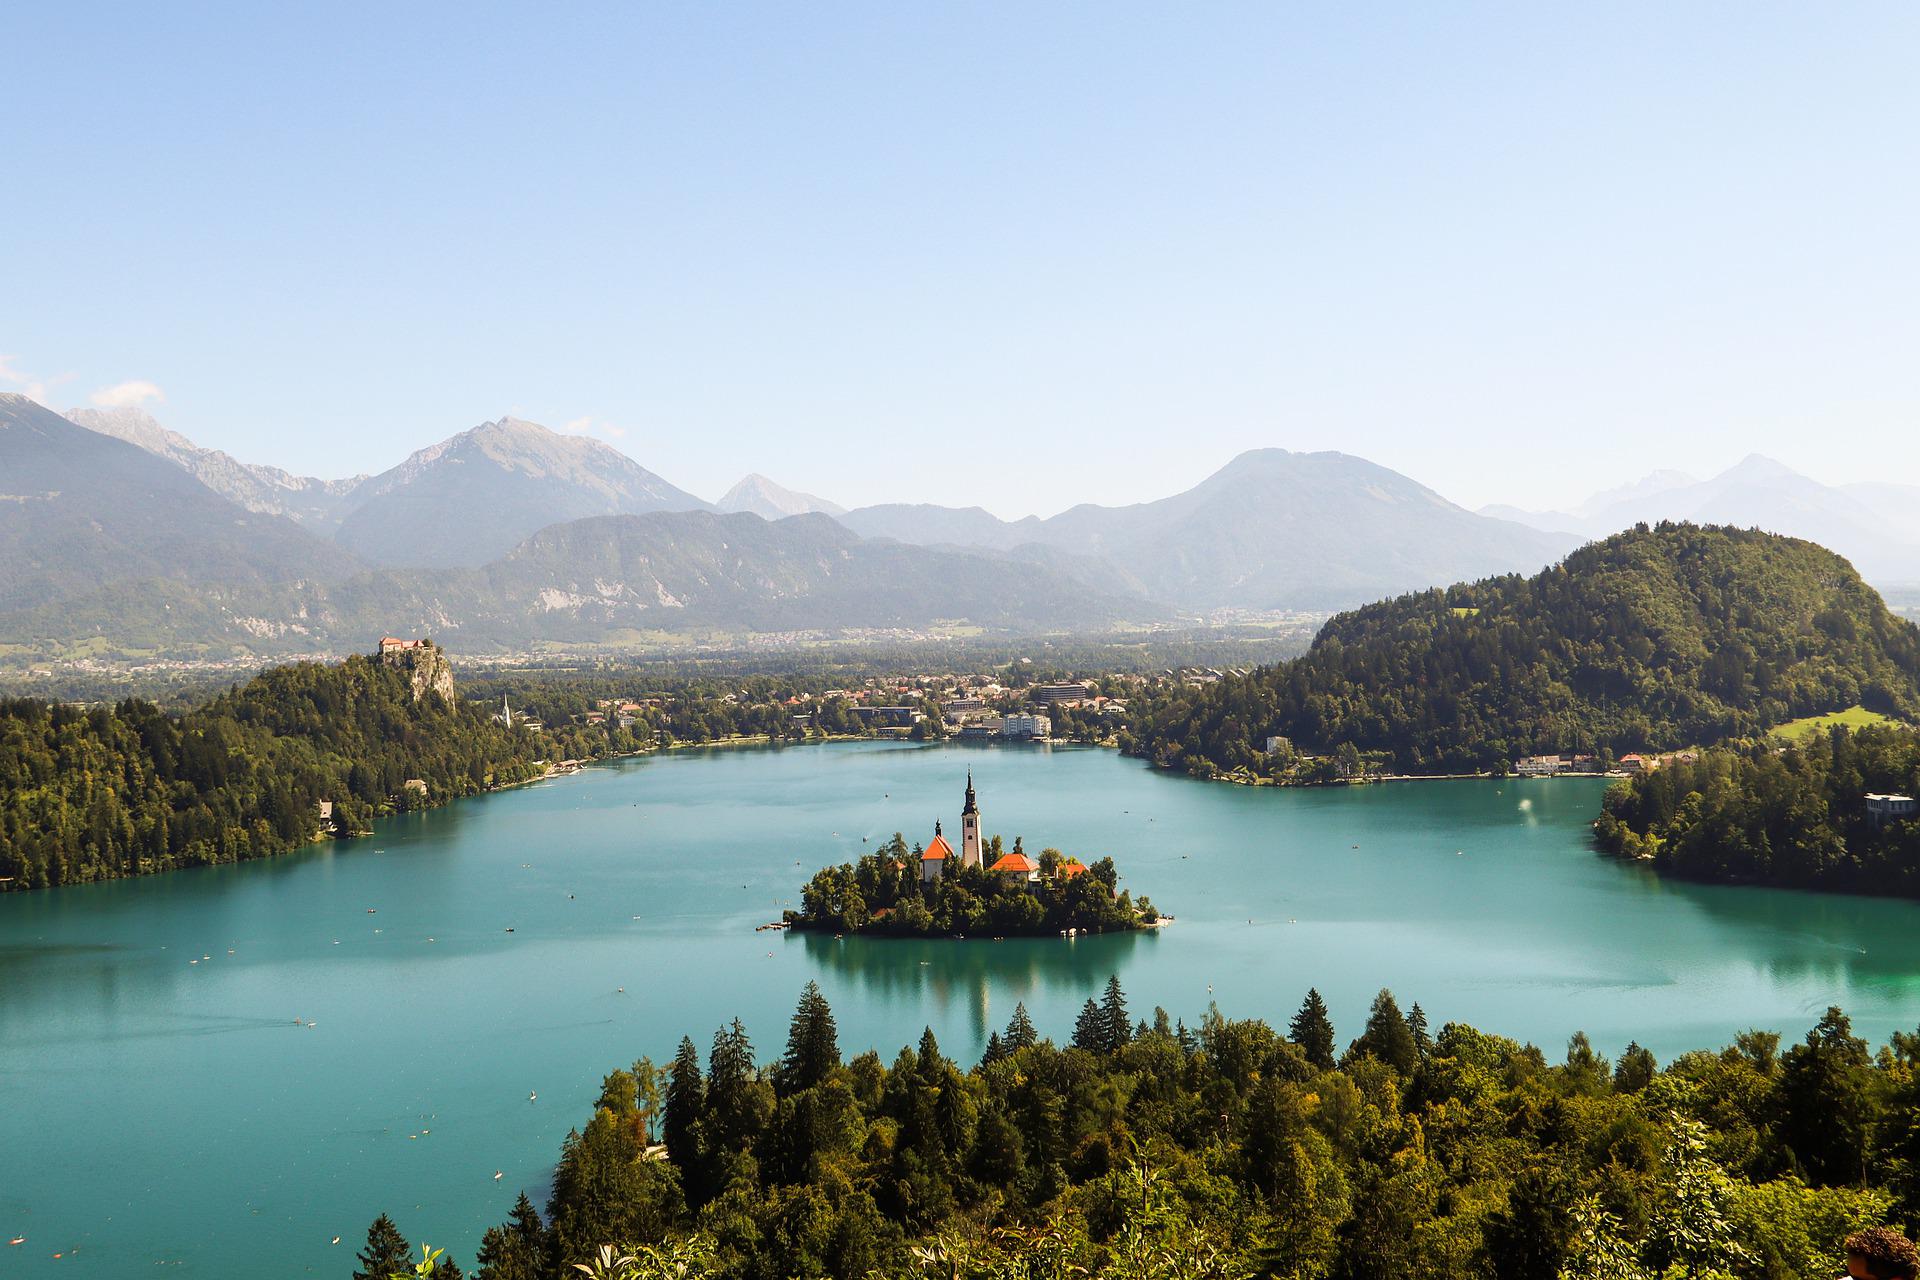 The short training programmes offer the chance to discover beautiful countries such as Slovenia